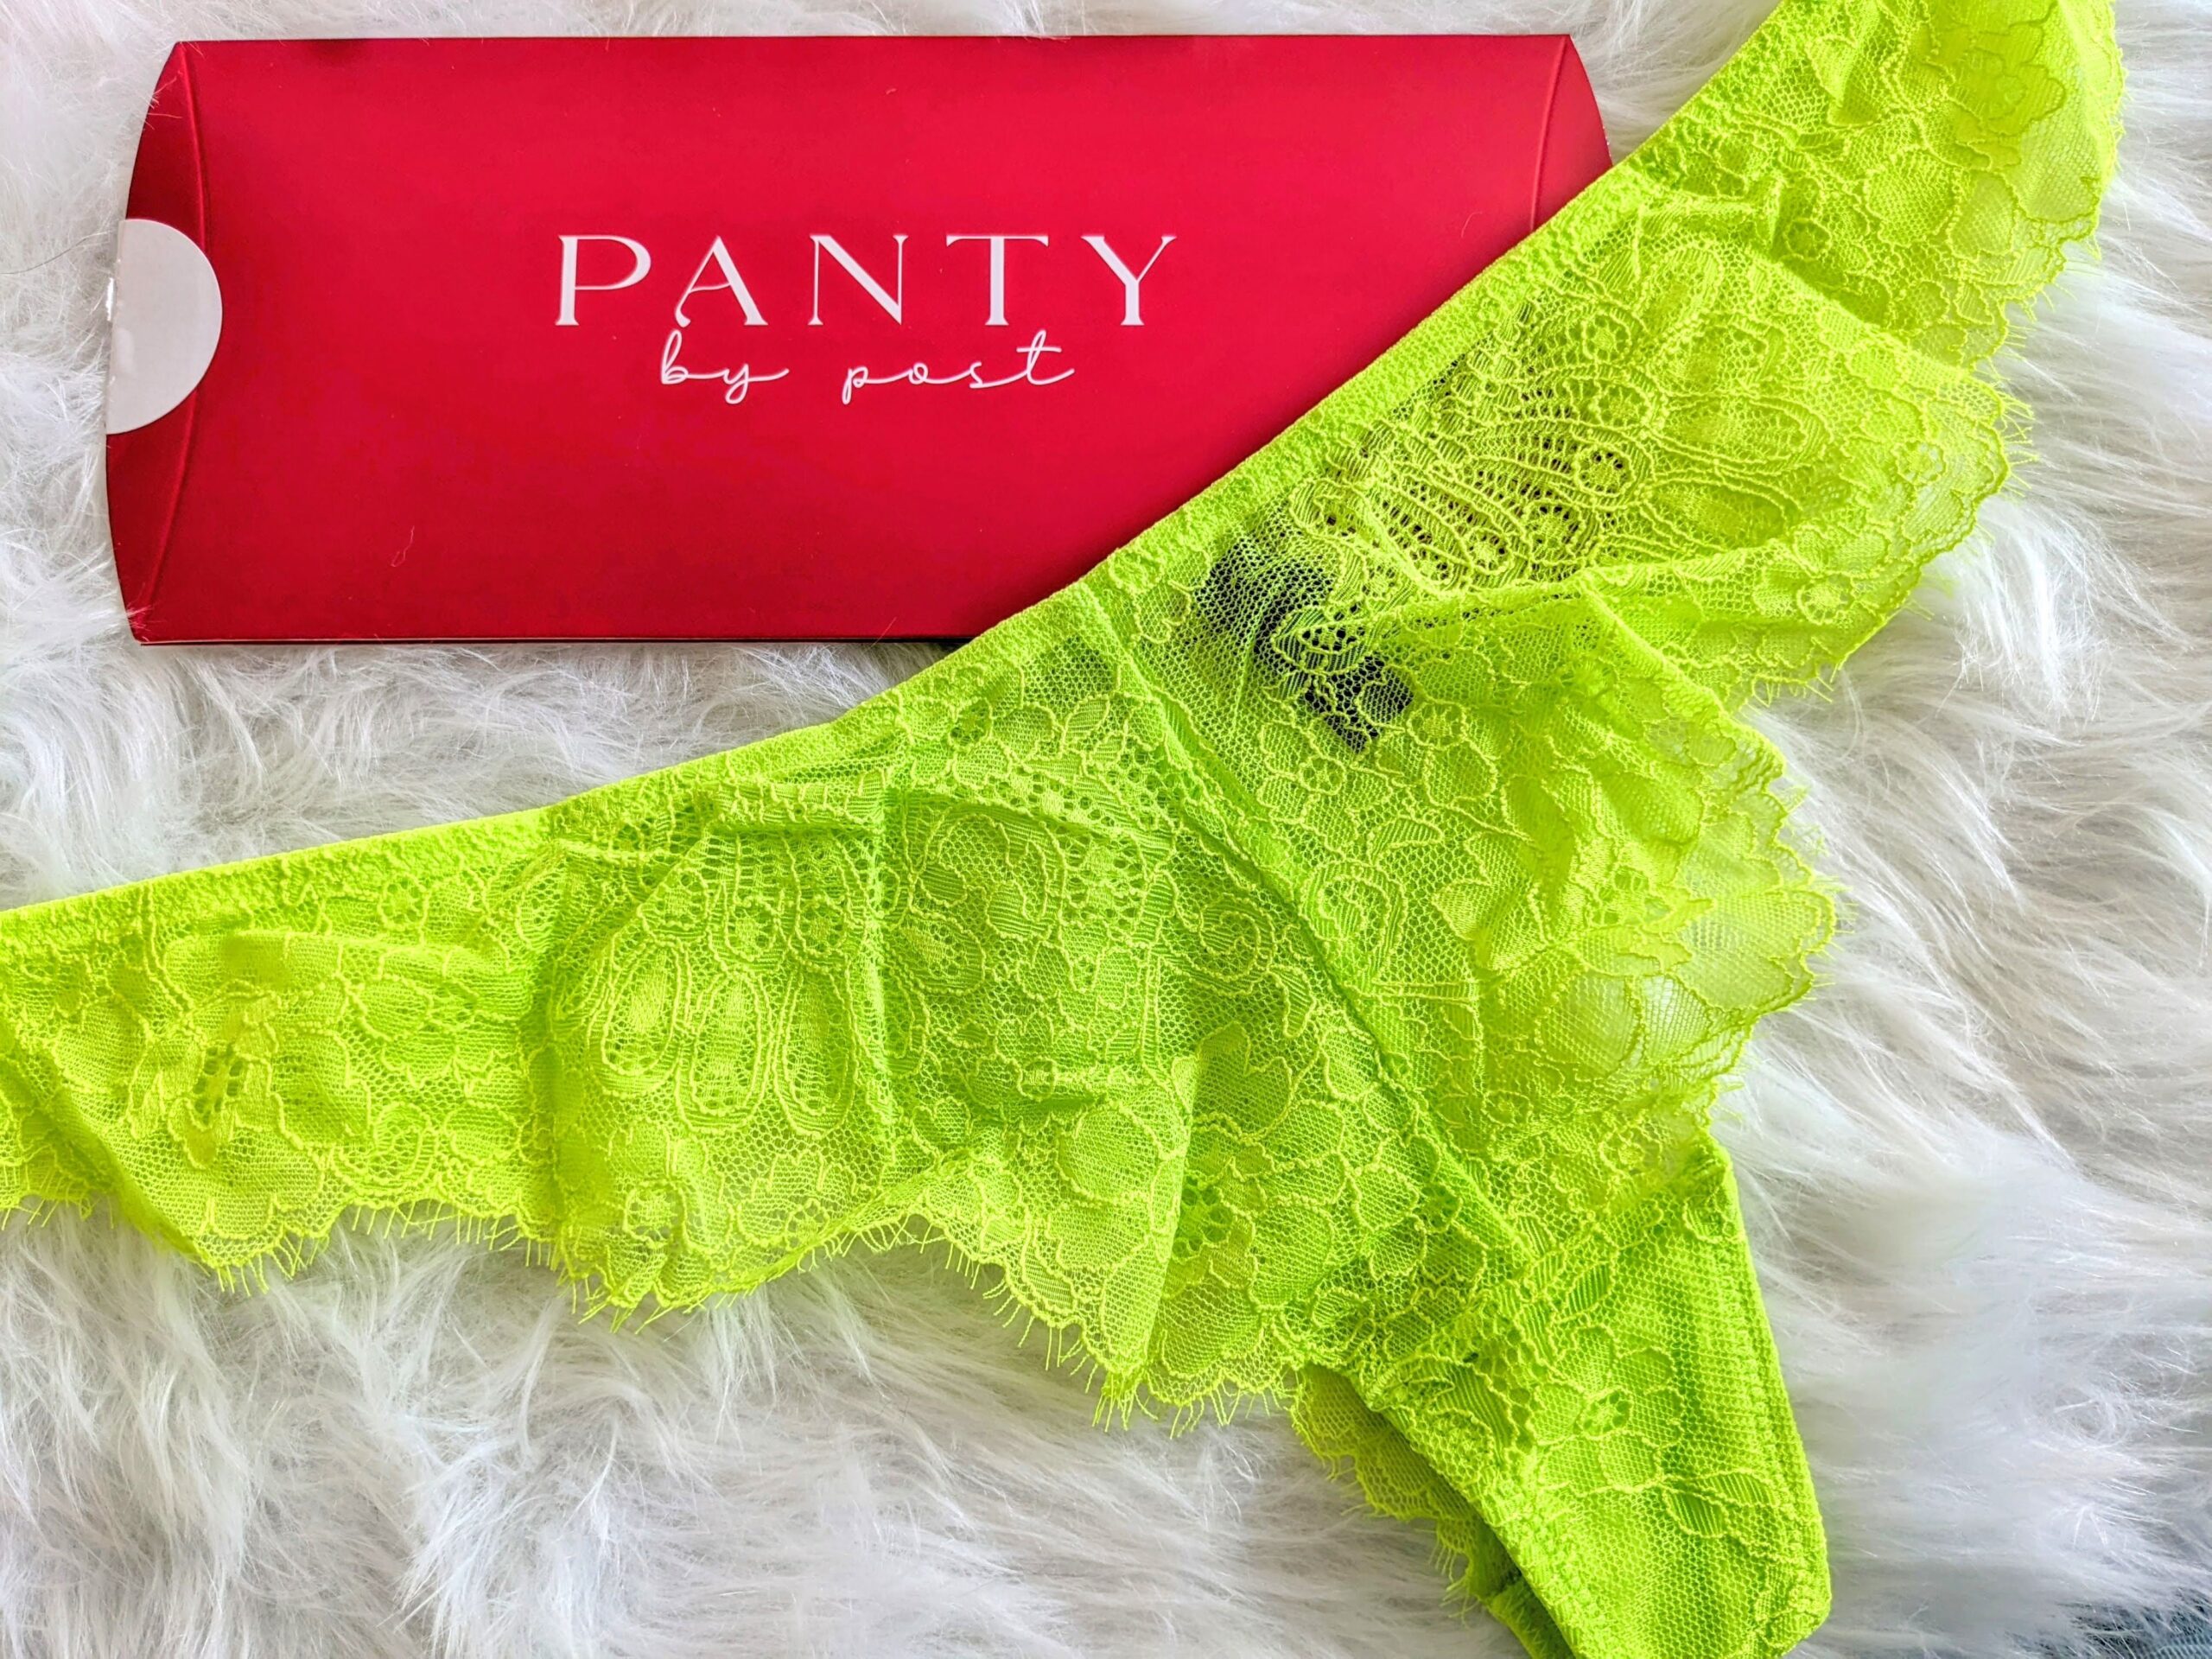 https://www.subscriptionboxes.ca/wp-content/uploads/2023/02/Panty-By-Post-Premium-Luxe-Review-Save-30-OFF-3-scaled.jpg